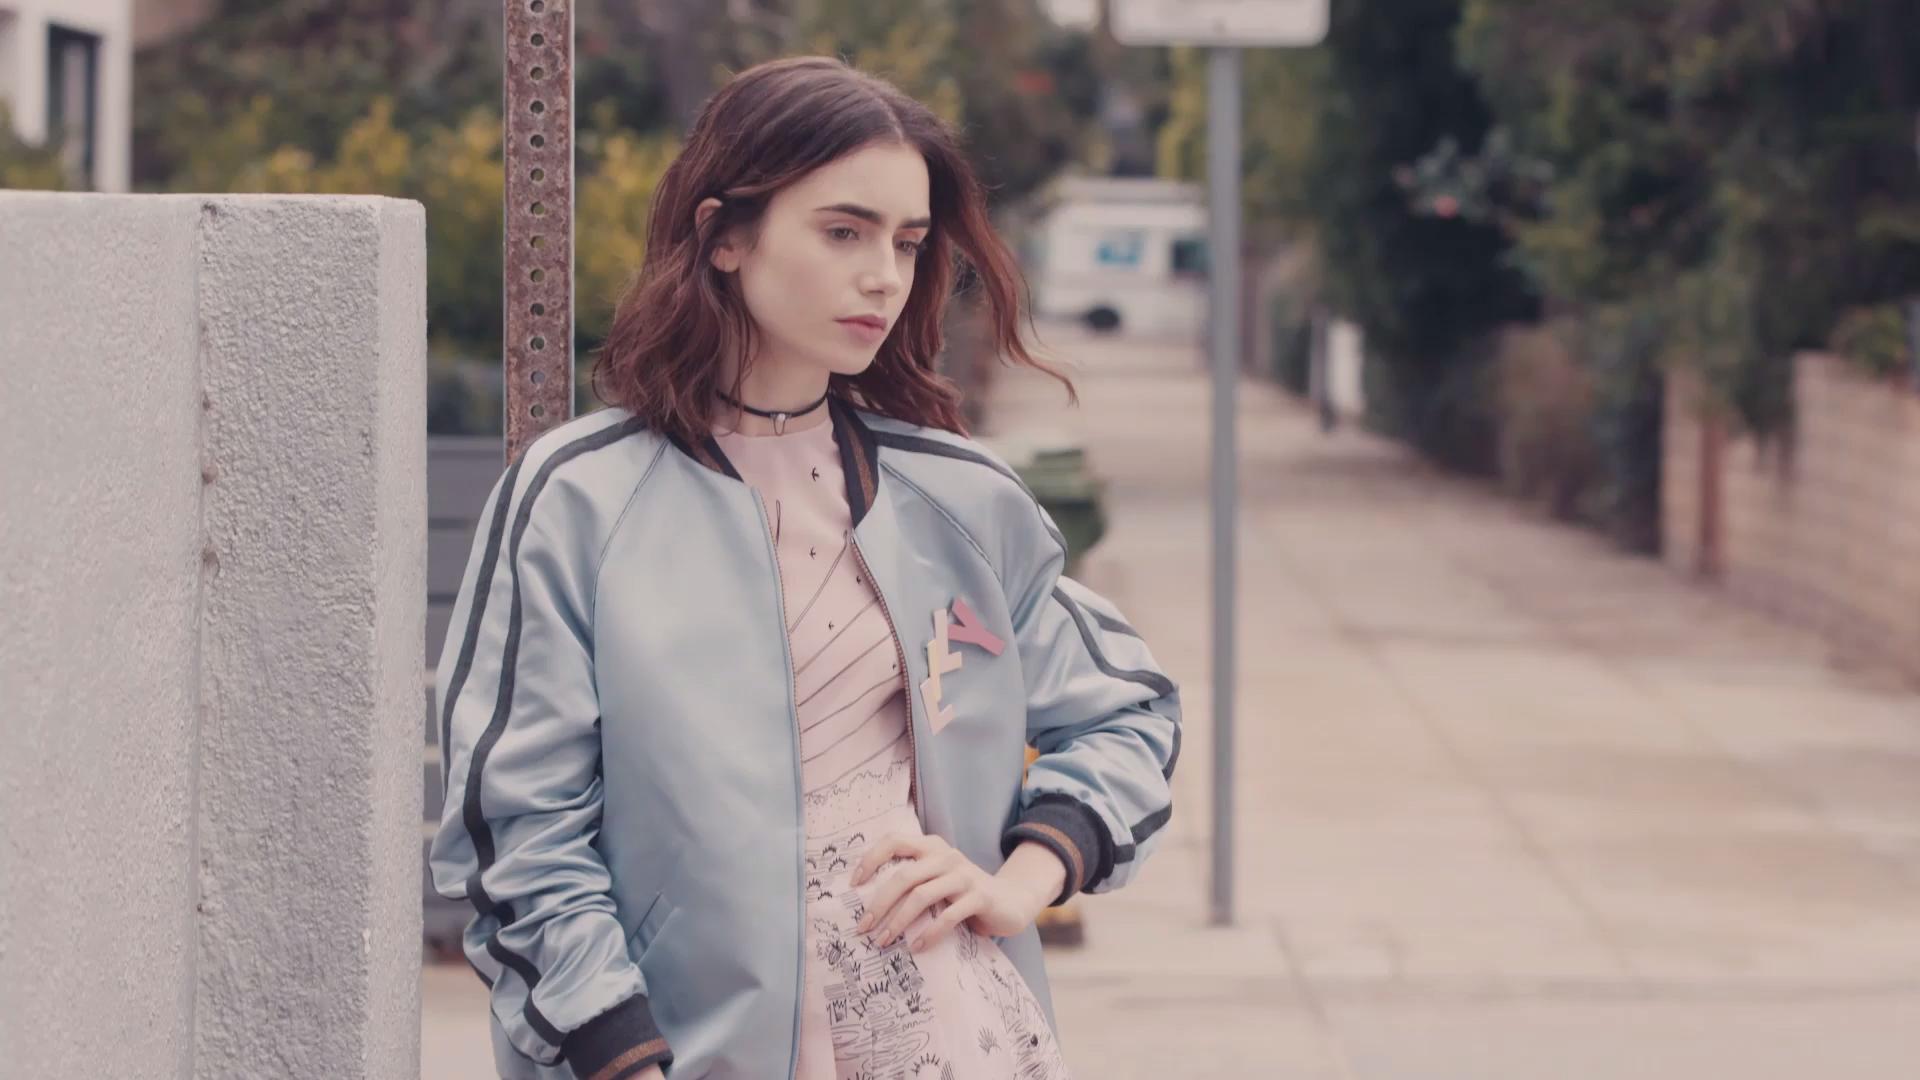 Lily Collins's Personal Style Is Quite Eclectic